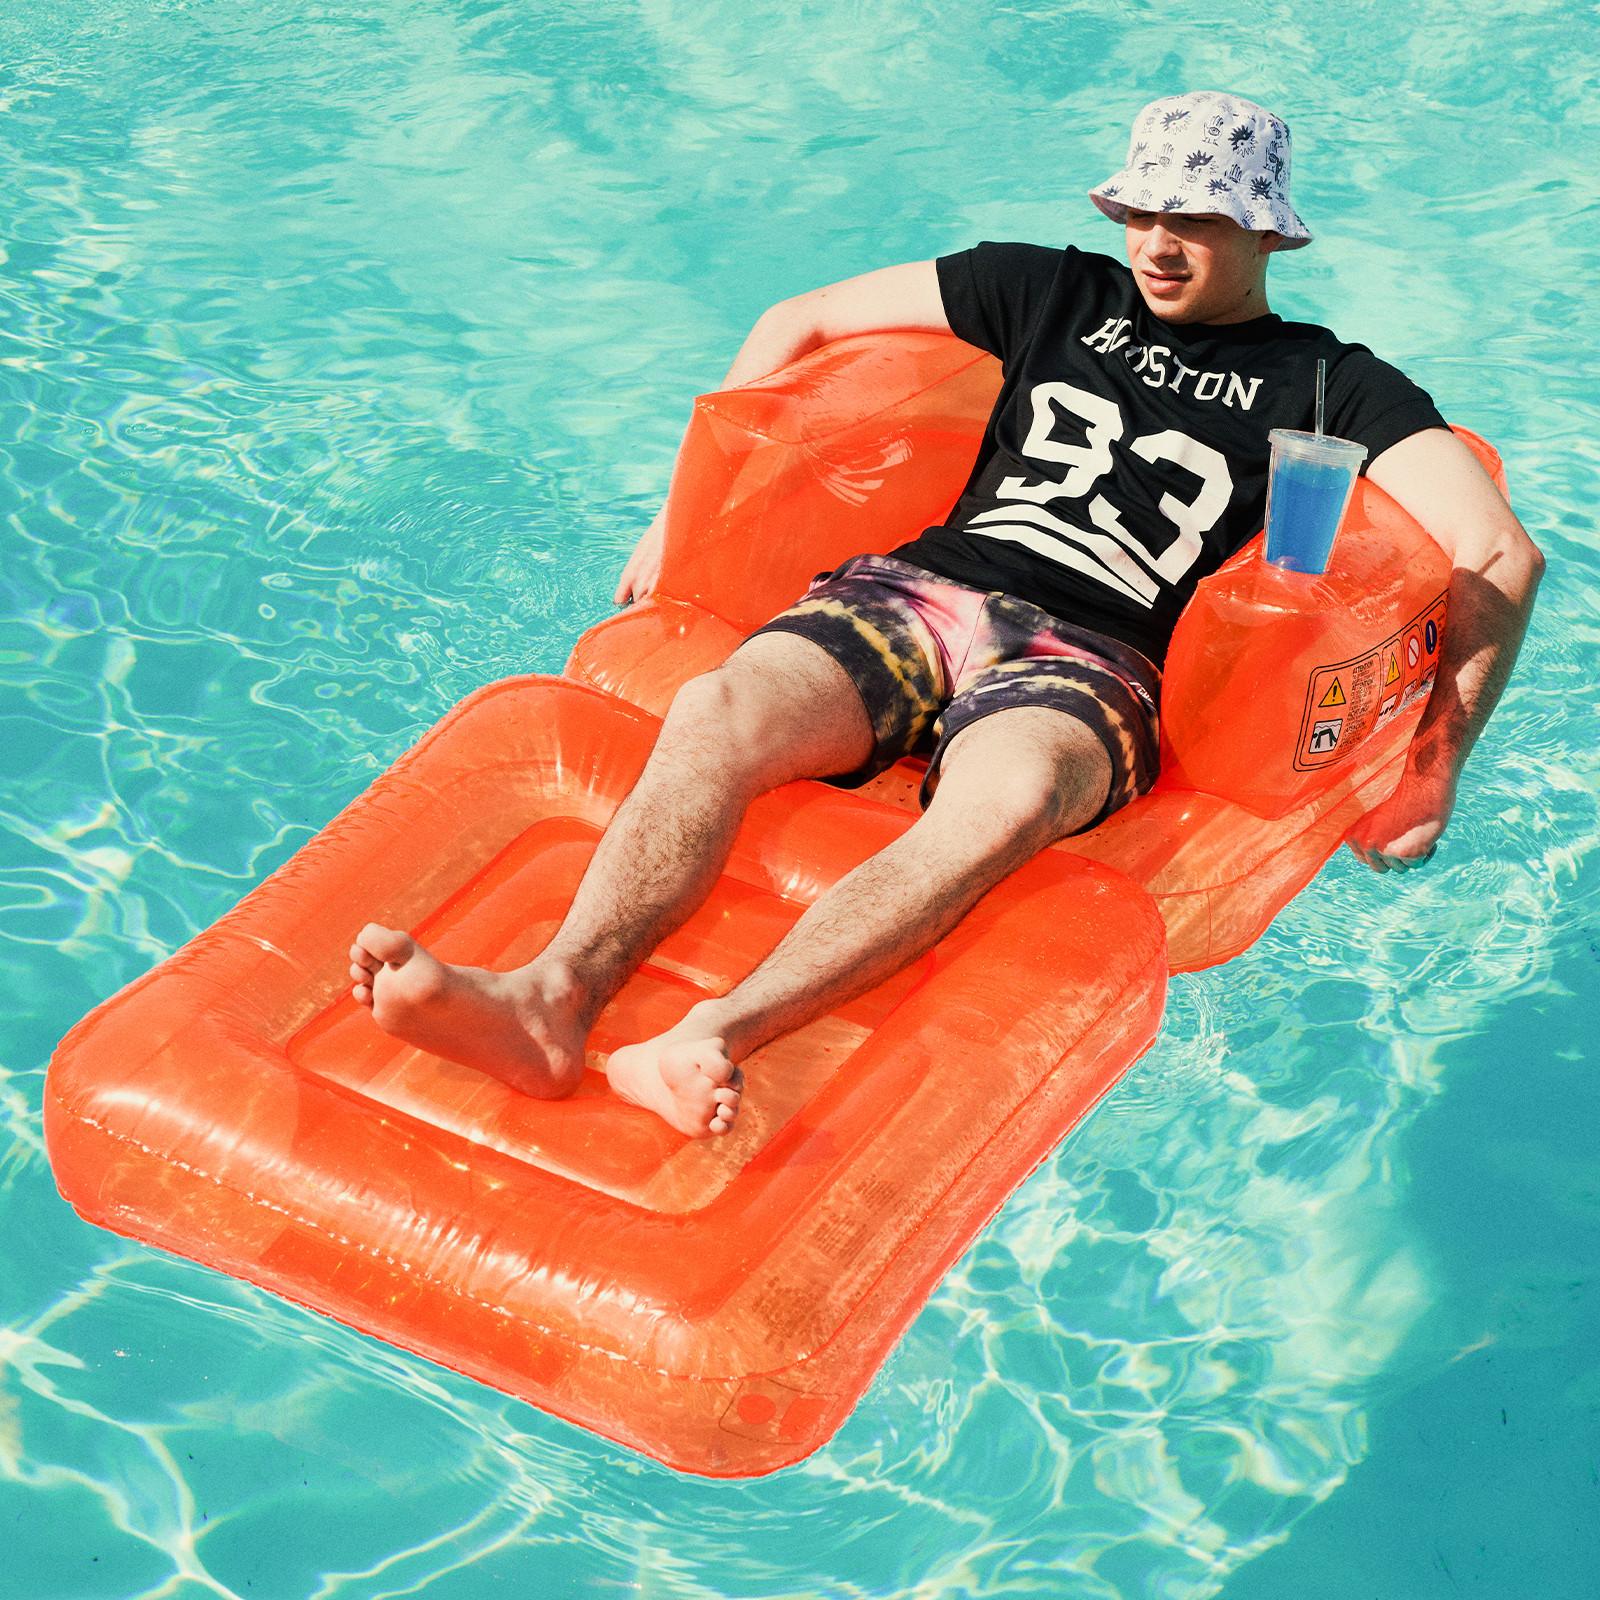 Man lying on lilo in the pool wearing a bucket hat, black Houston tee and tie dye shorts